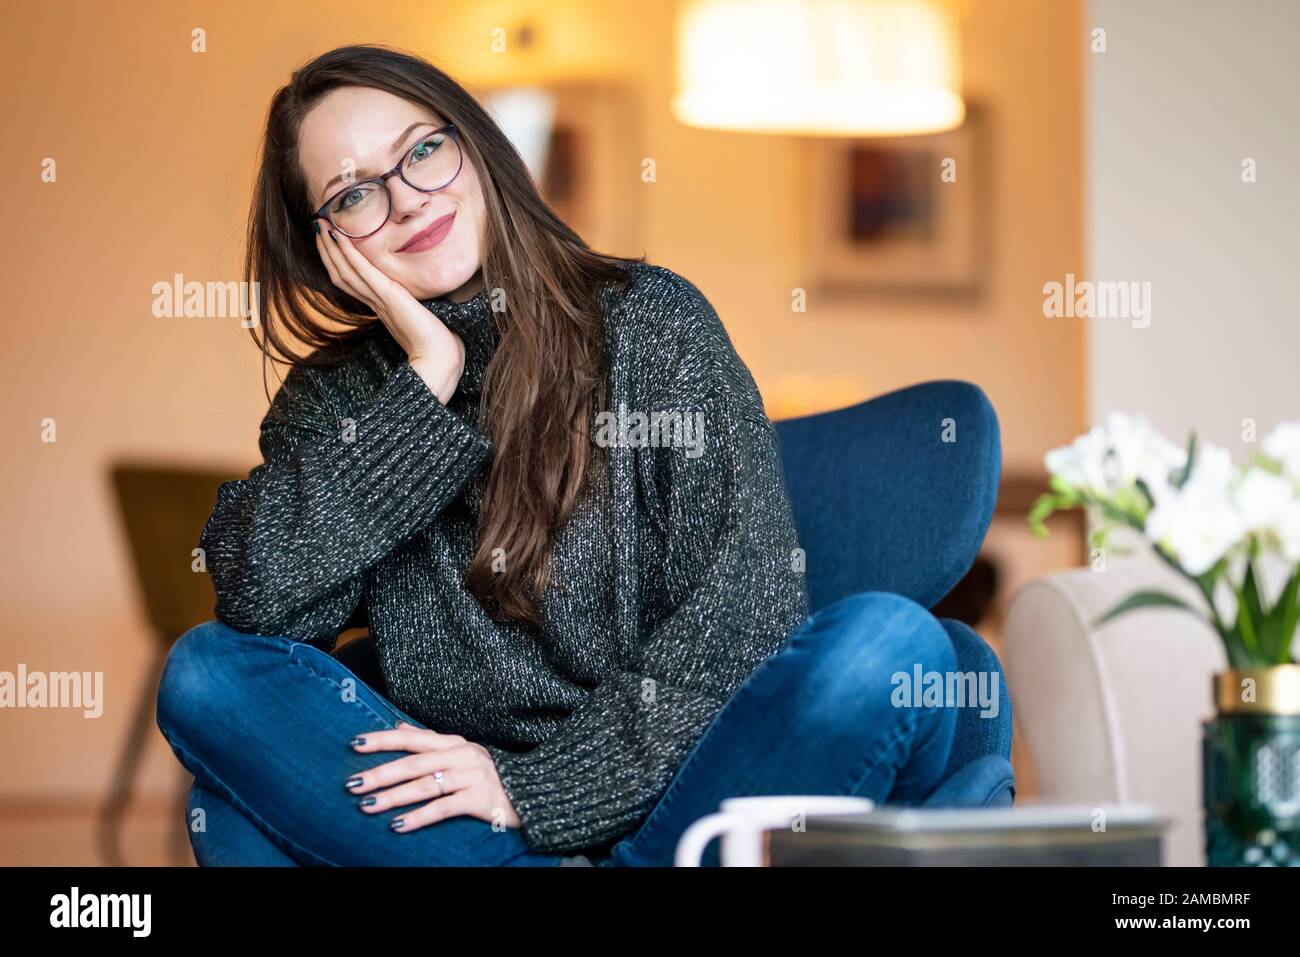 Portrait shot of smiling beautiful brunette young woman relaxing on the chair in the living room at home. Stock Photo